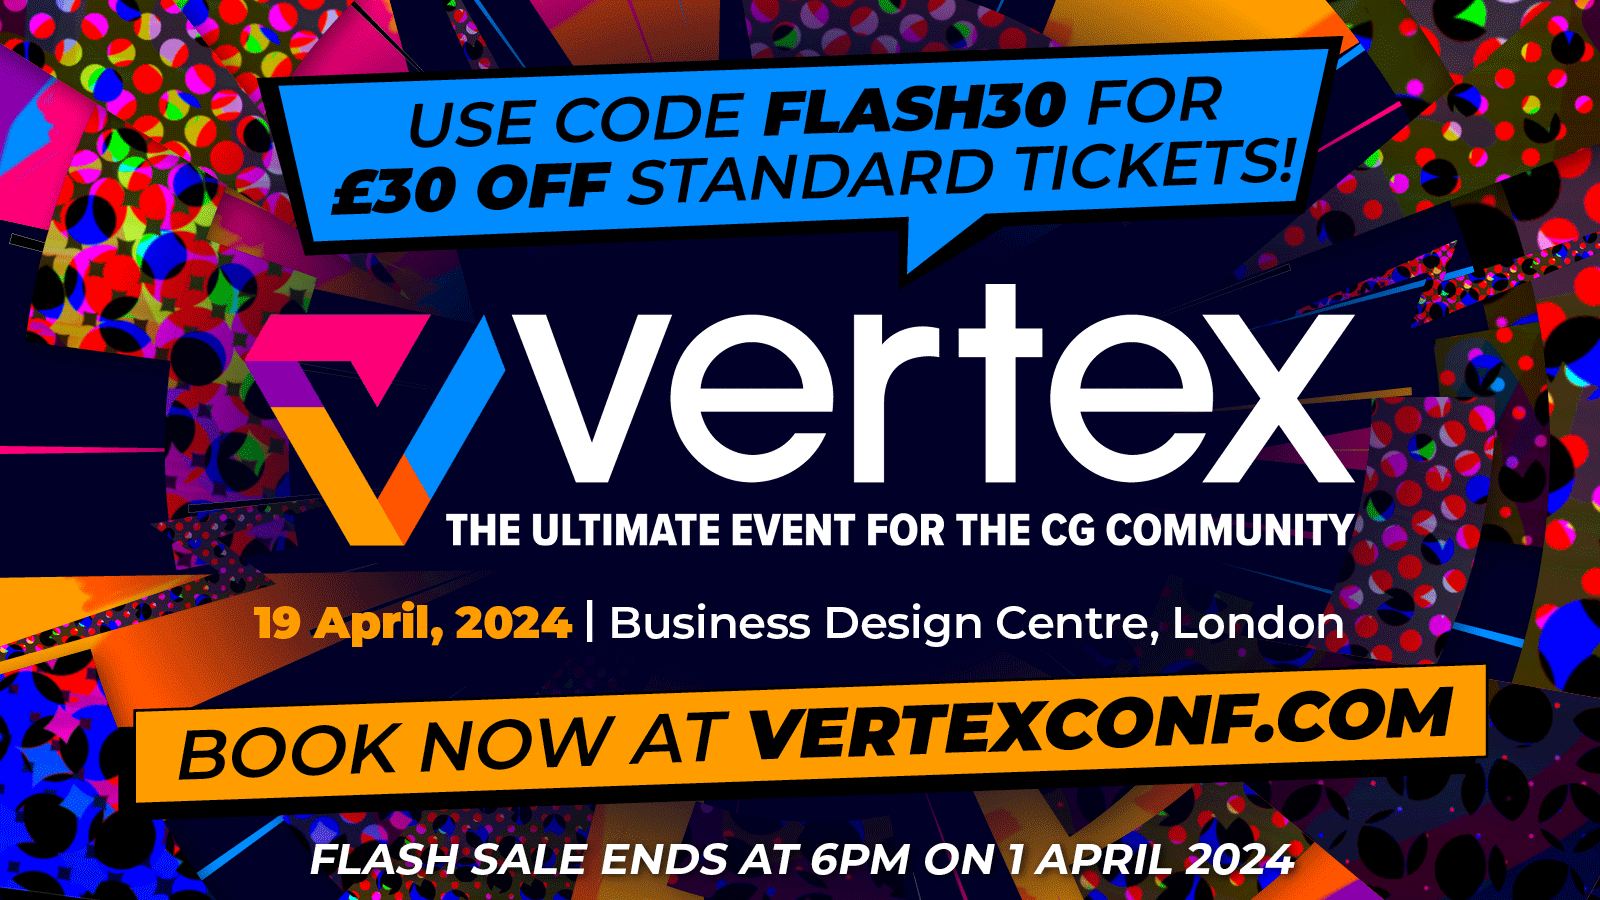 Vertex flash sale: save £30 on a ticket to our digital art and 3D festival - speakers include Pernille Ørum, Pixar's Dylan Sisson and David Levy